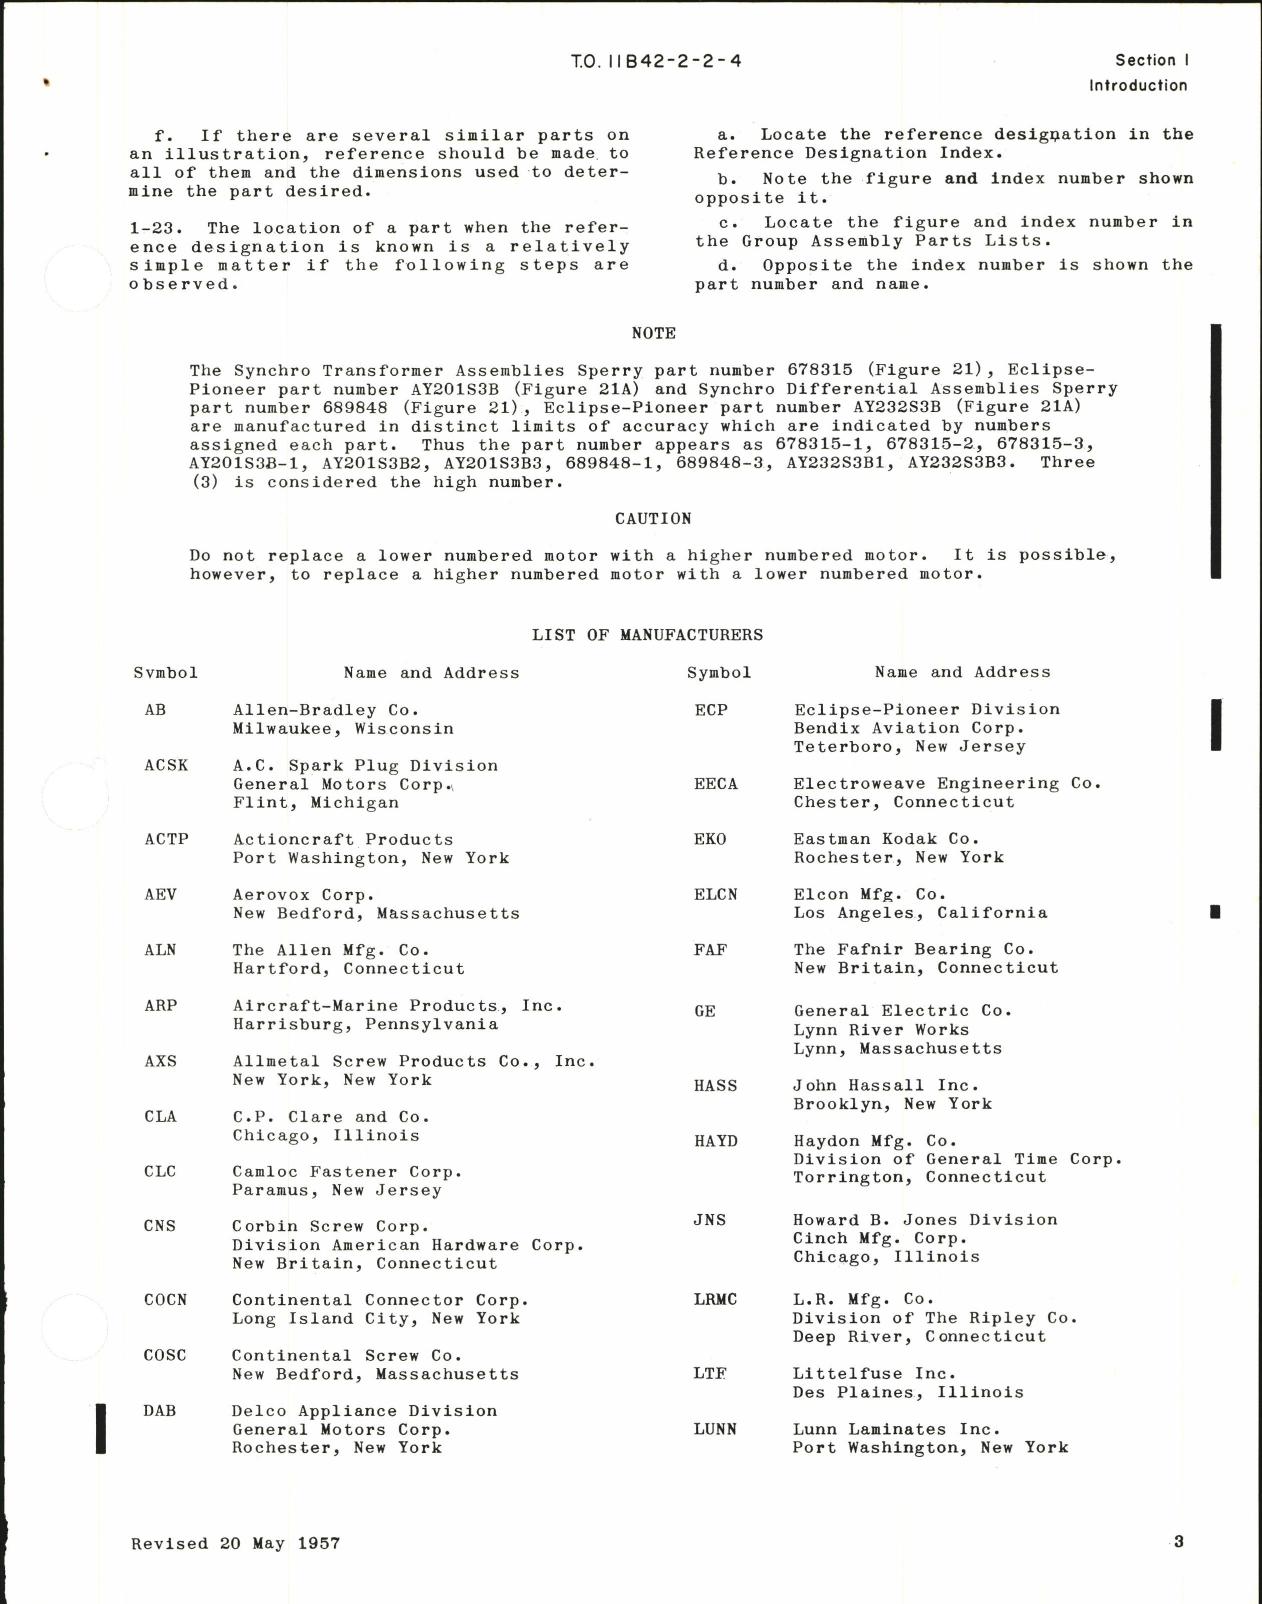 Sample page 5 from AirCorps Library document: Illustrated Parts Breakdown for Periscopic Bombsight Stabilizer Type B-1 Part No. 667126